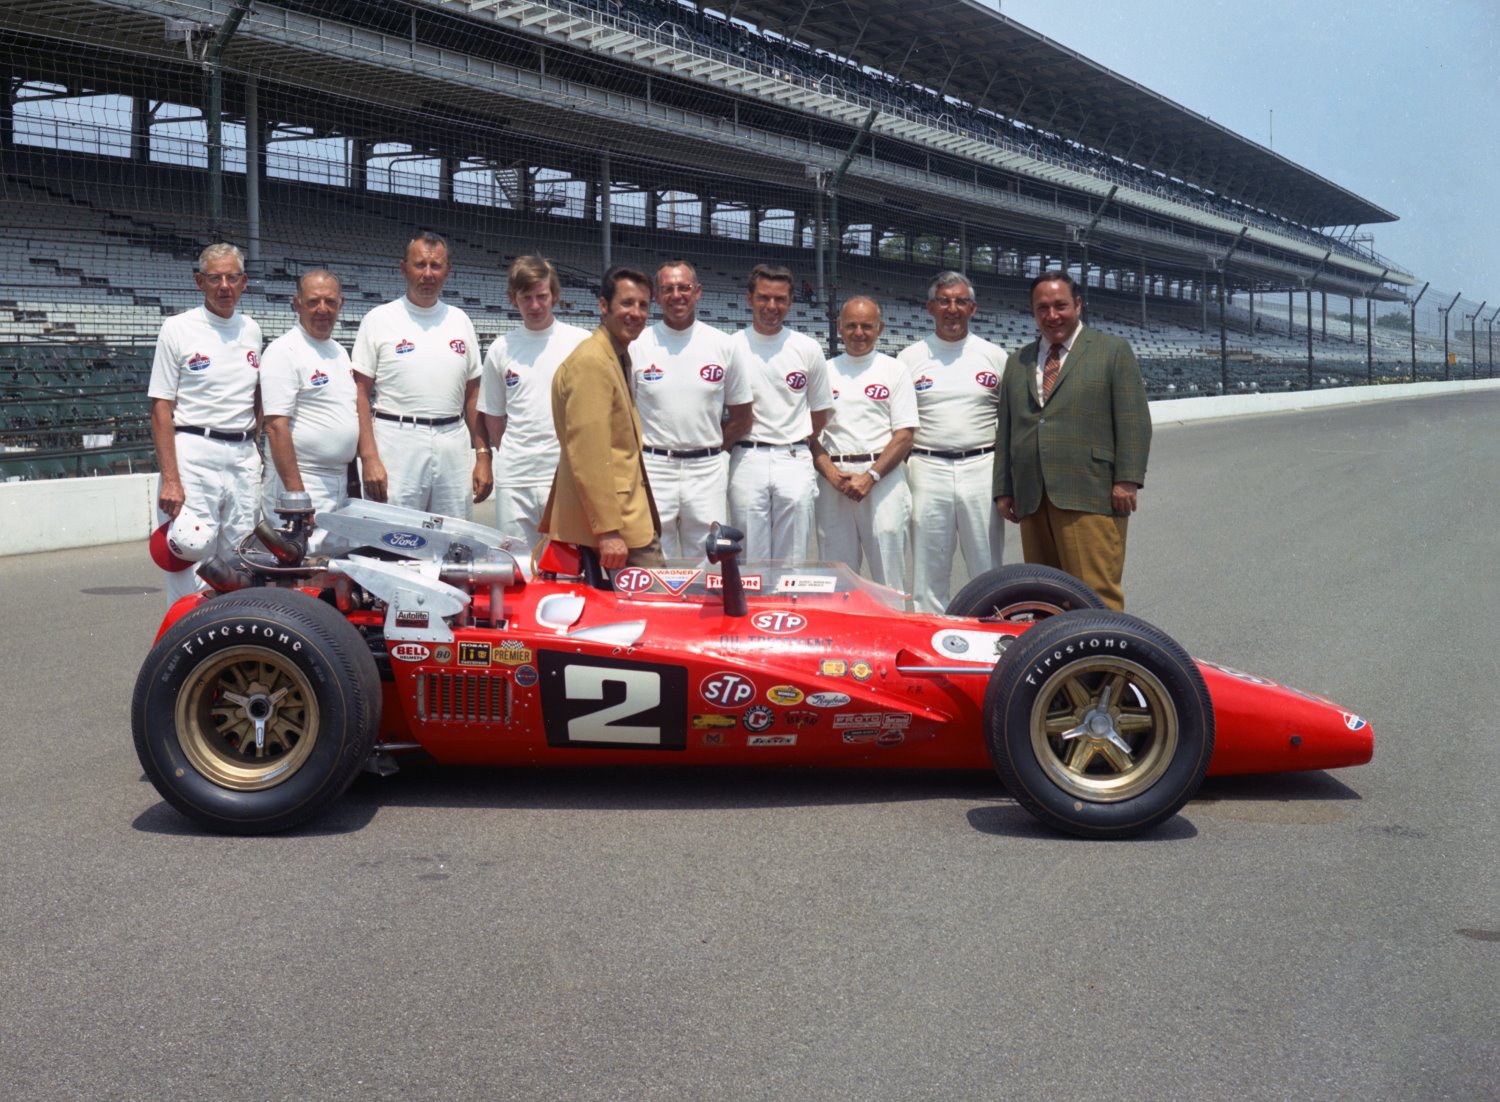 This photo does not do justice to how bright the 1969 STP paint scheme Mario Andretti had